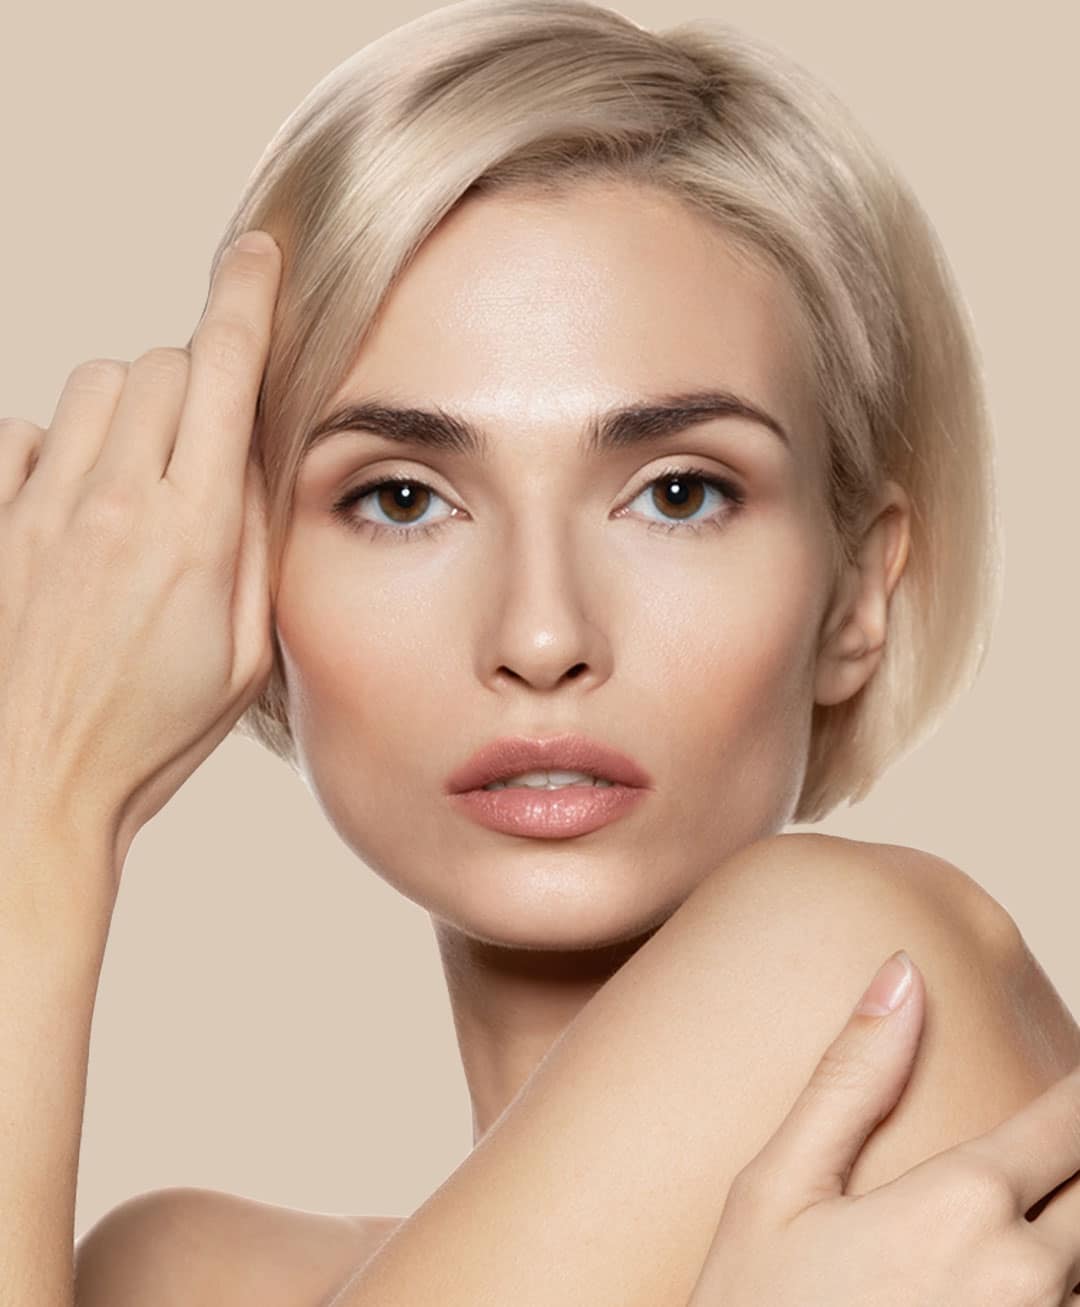 Beautiful woman with short blonde hair holds her hand to her face and models facial treatments.